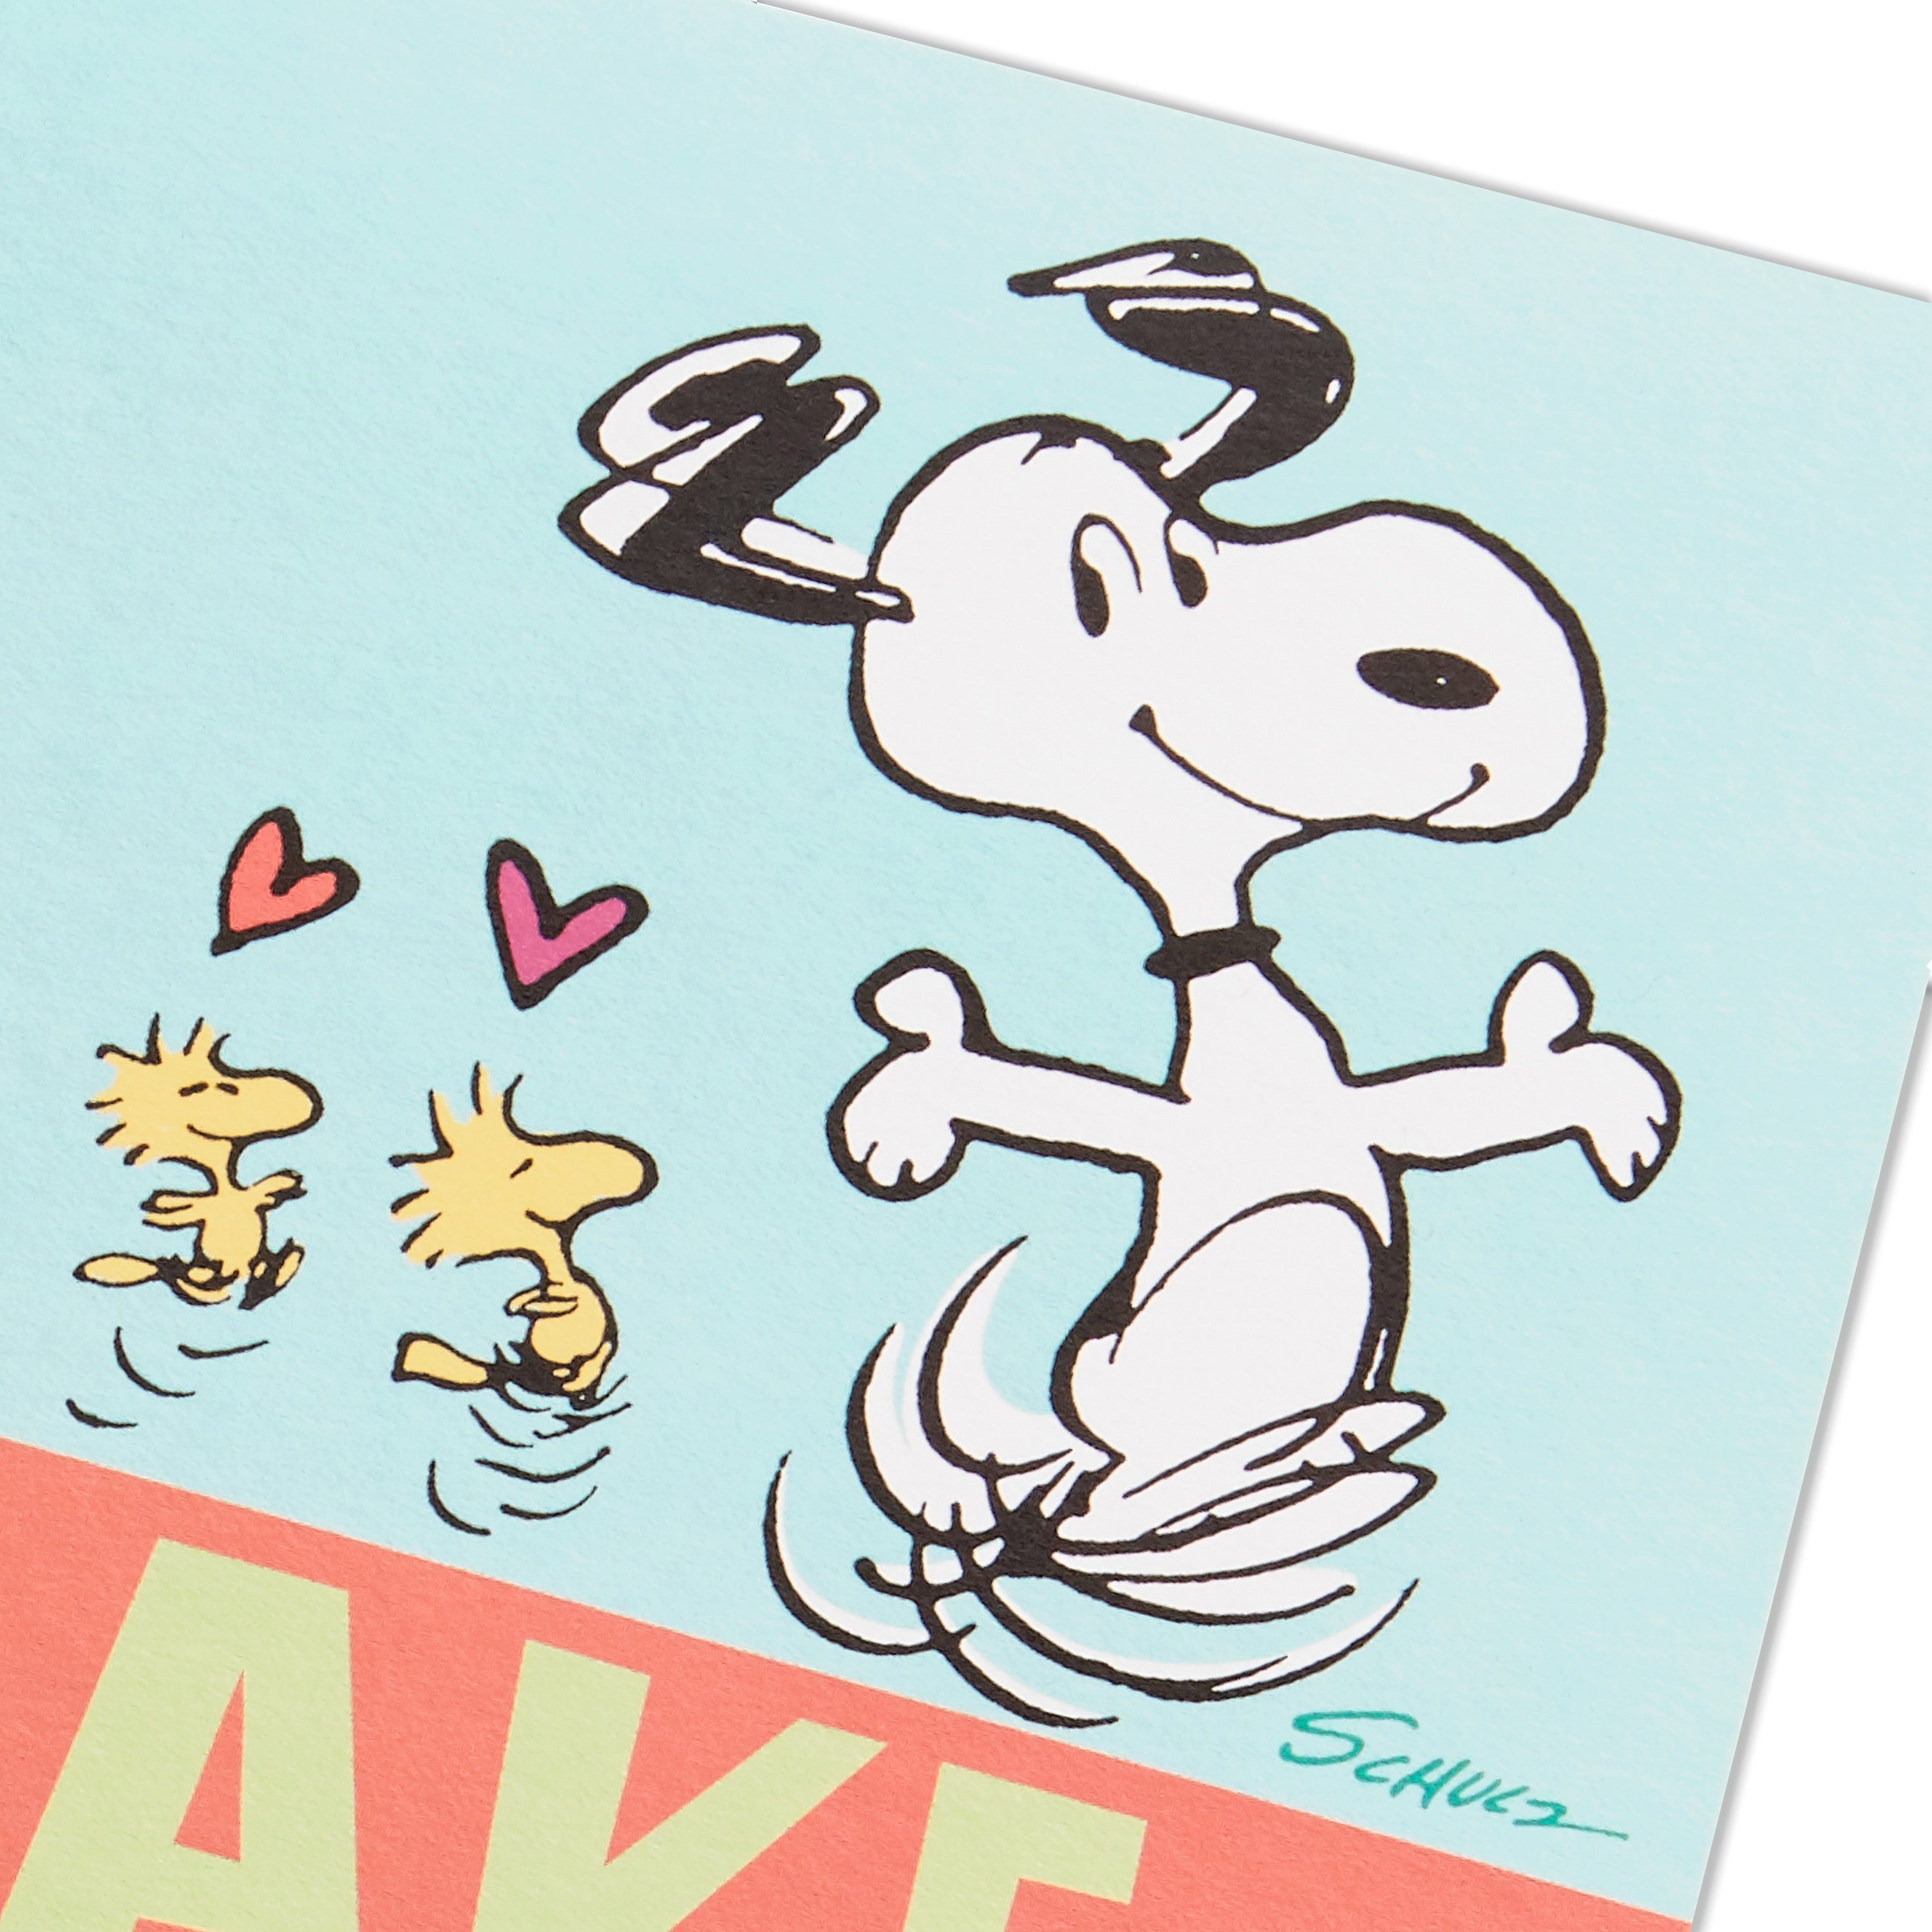 Pop Up Peanuts Birthday Card for Mom (Snoopy, Hugs and Kisses for You)